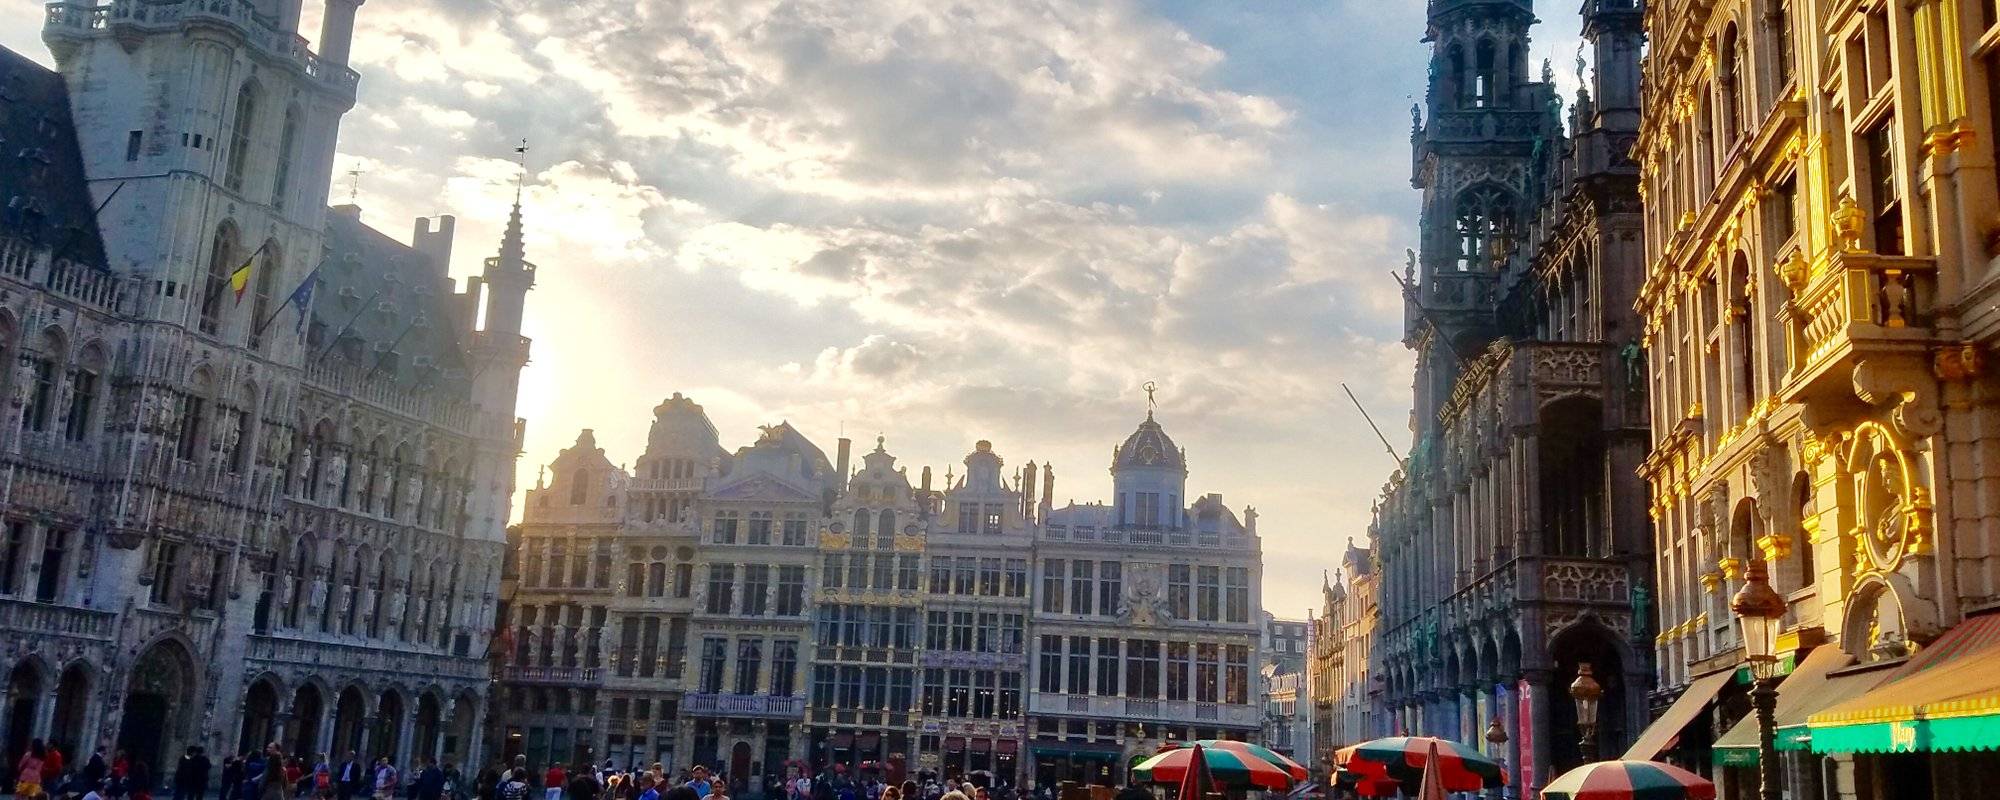 TRAVELMAN BRUSSELS, BELGIUM: I Stayed With Good Friends I met Last Year